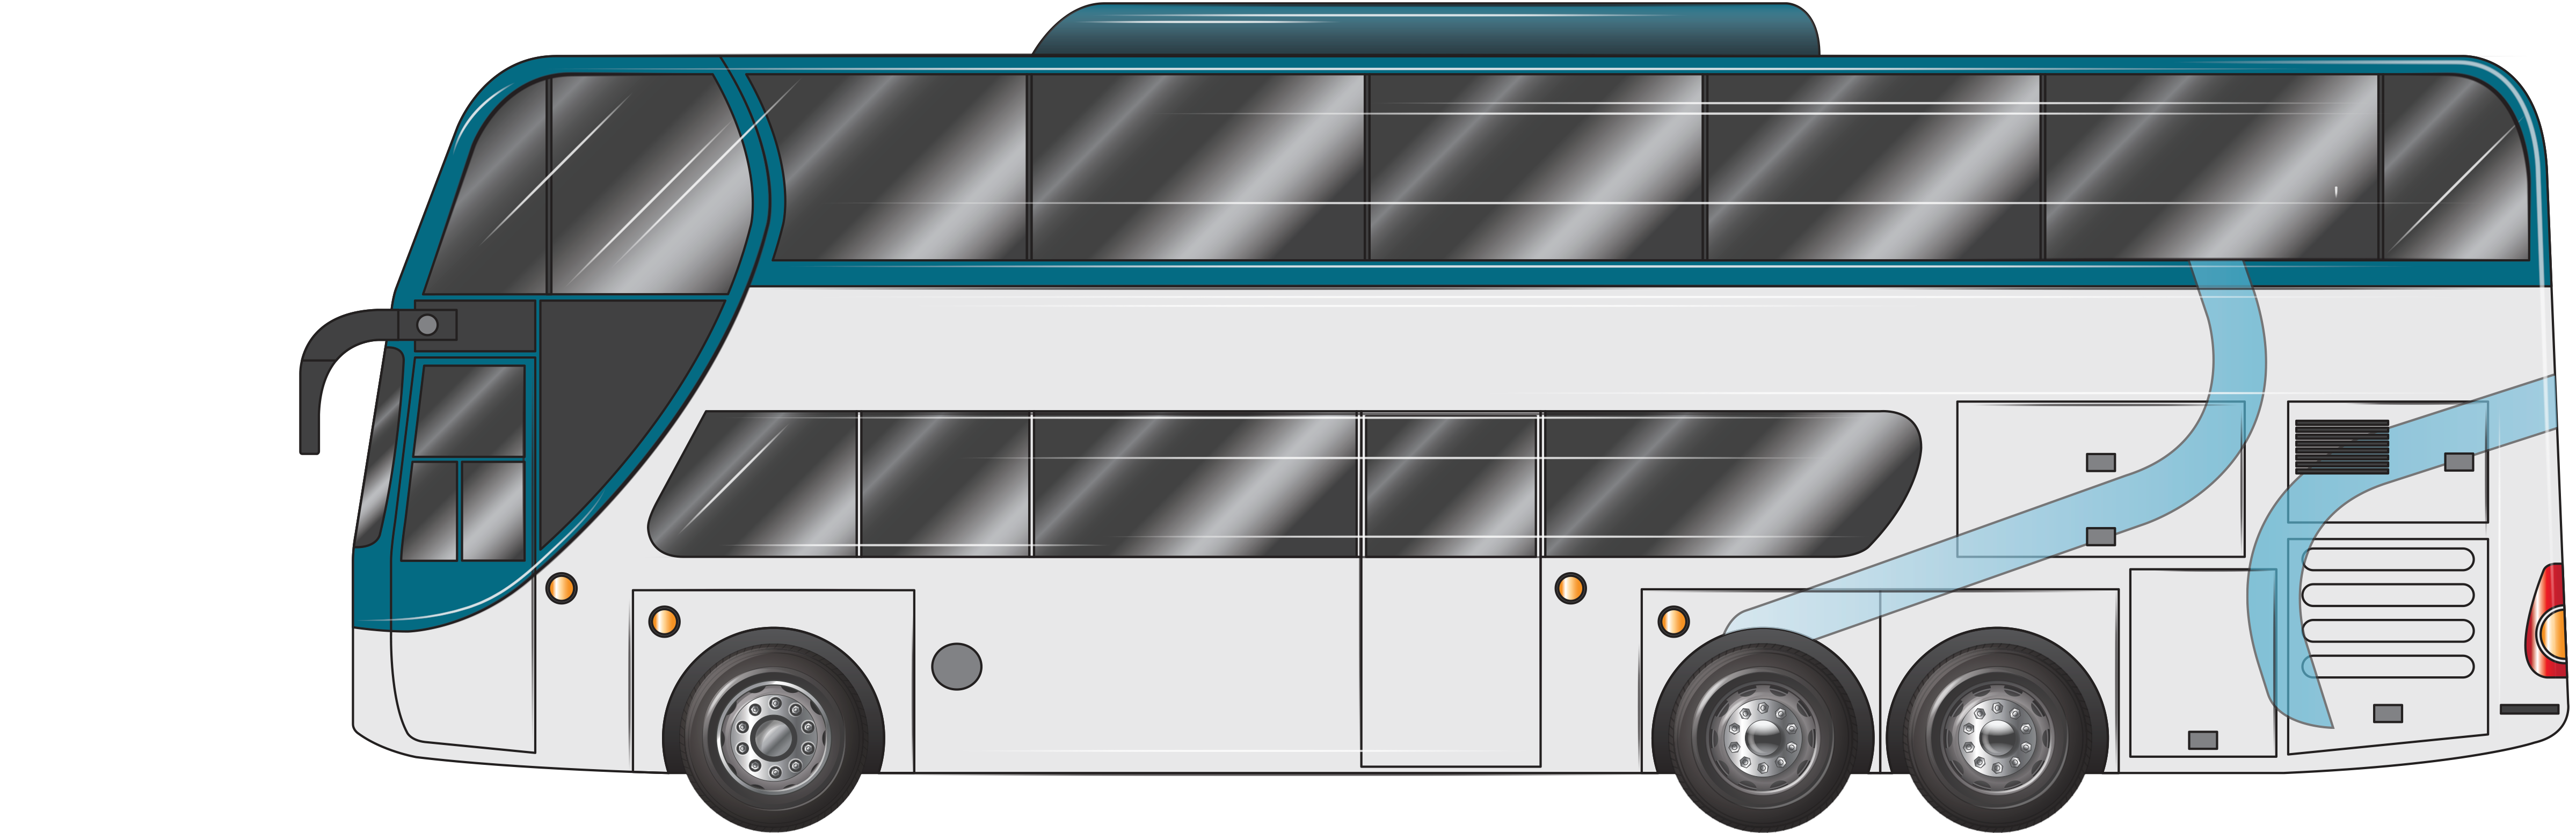 three axle double decker bus no longer than 12.5m with a rear tandem axle group fitted with single tyres on one axle and dual tyres on the other axle example